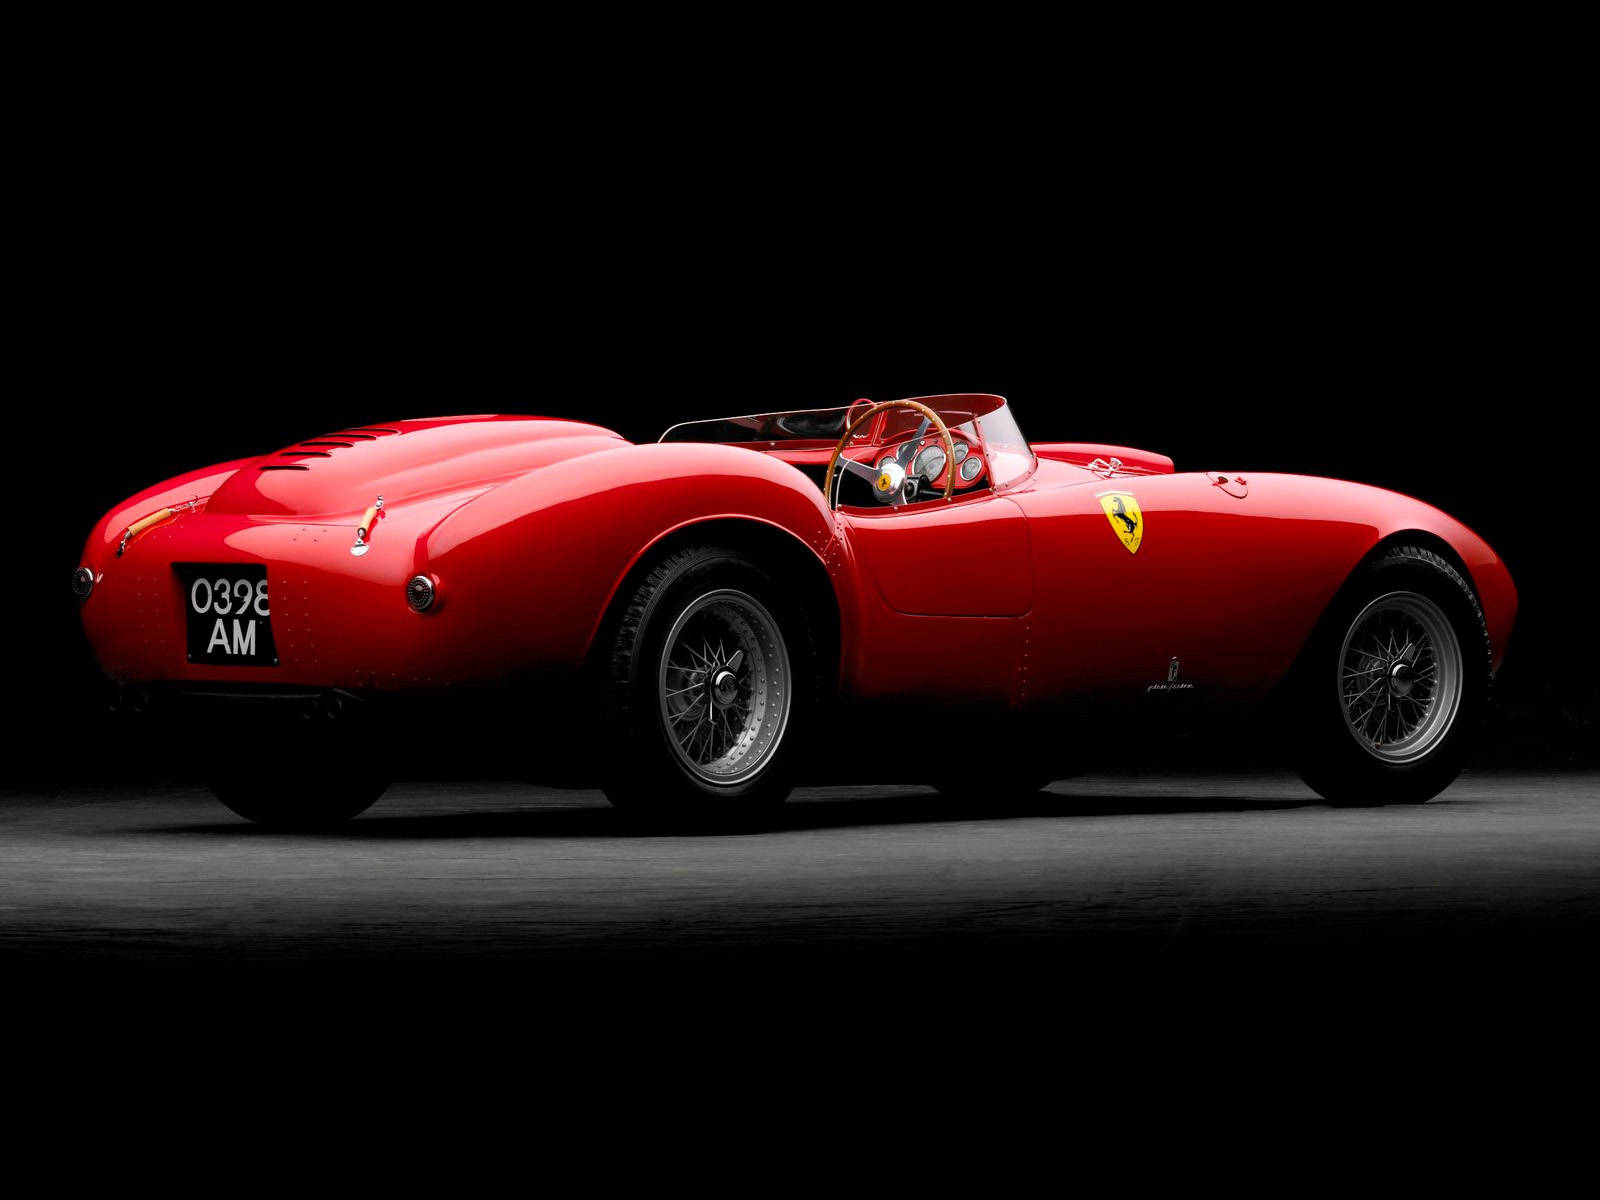 4kferrari Red 375 Plus Would Be Translated To 